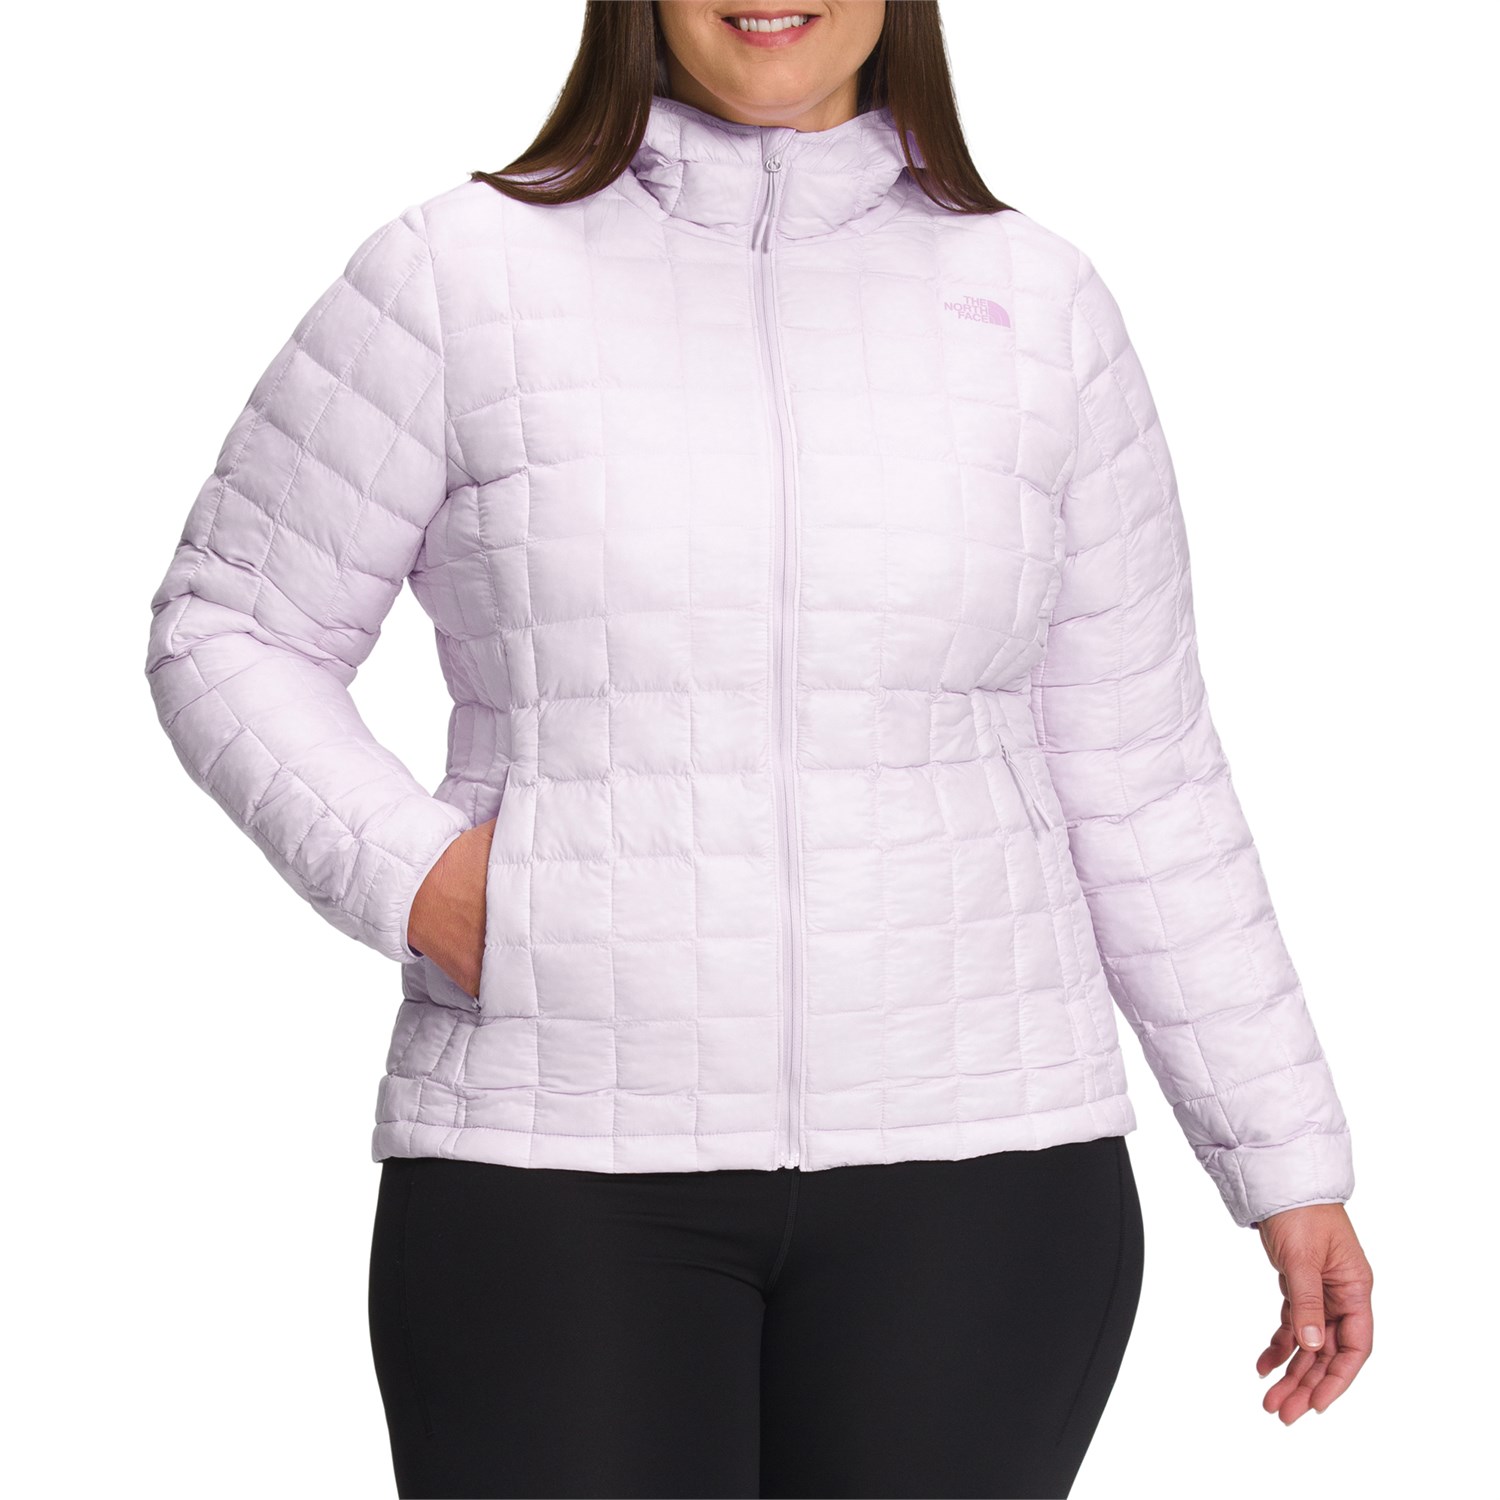 Худи The North Face ThermoBall Eco 2.0 Plus, цвет Lavender Fog куртка the north face thermoball eco 2 0 plus цвет boysenberry